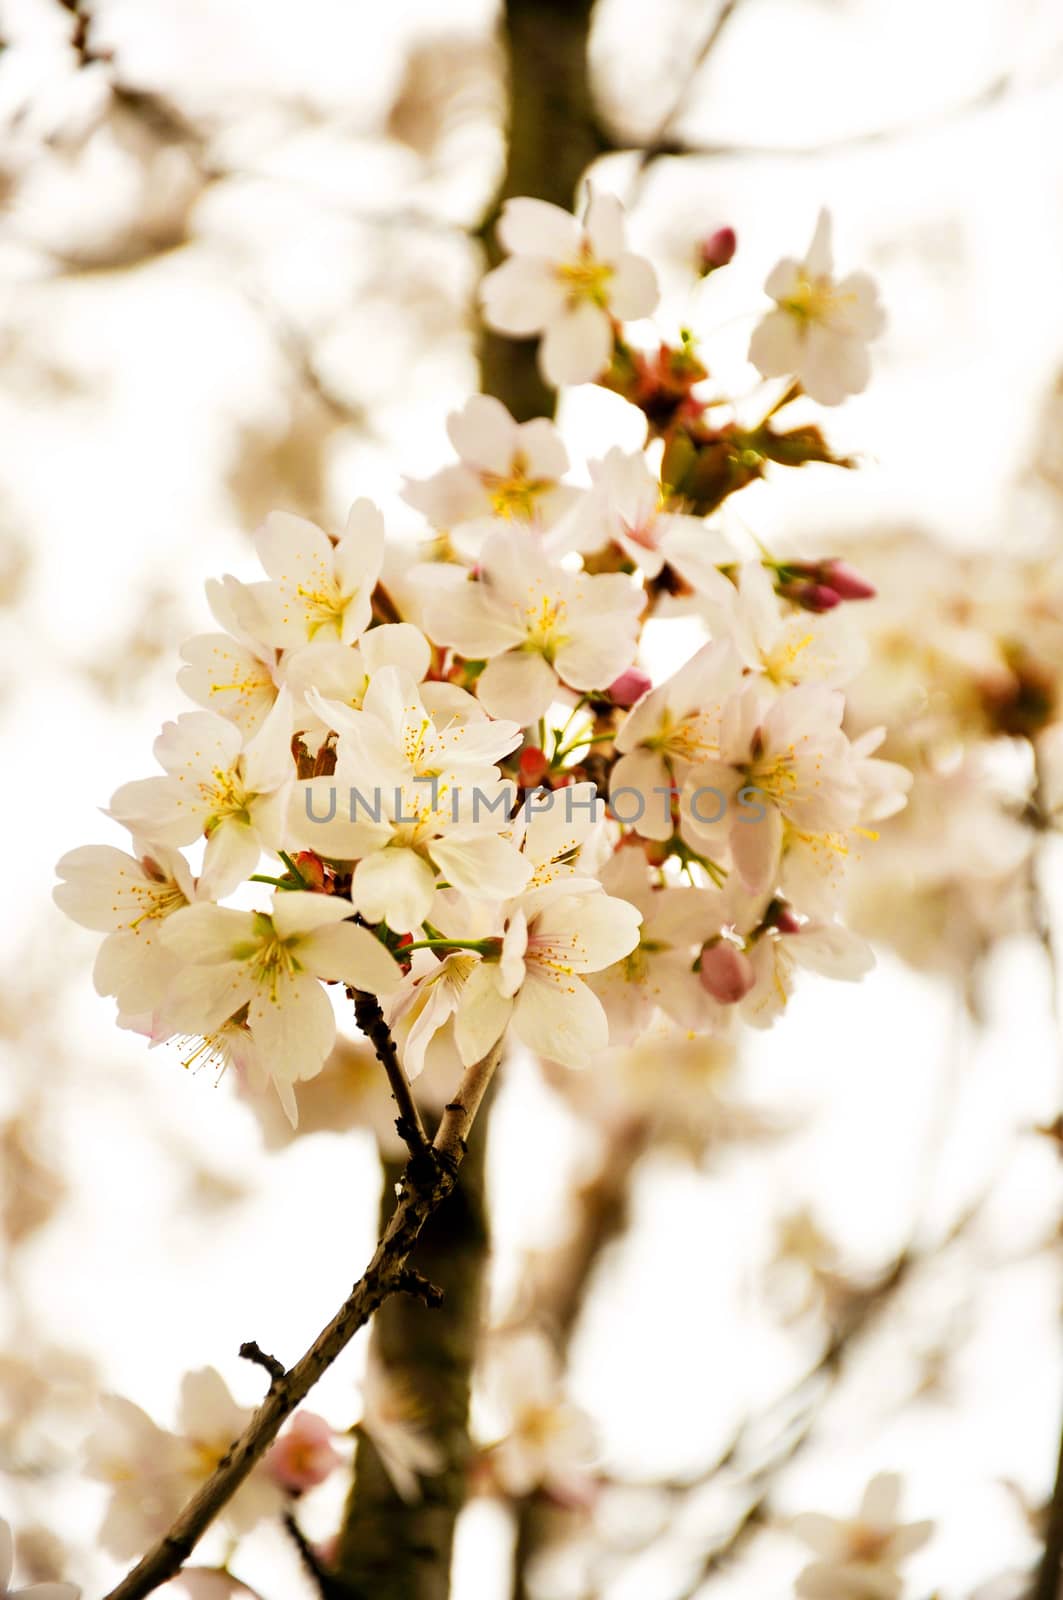 Paradise blooming white apple flowers in spring by Eagle2308